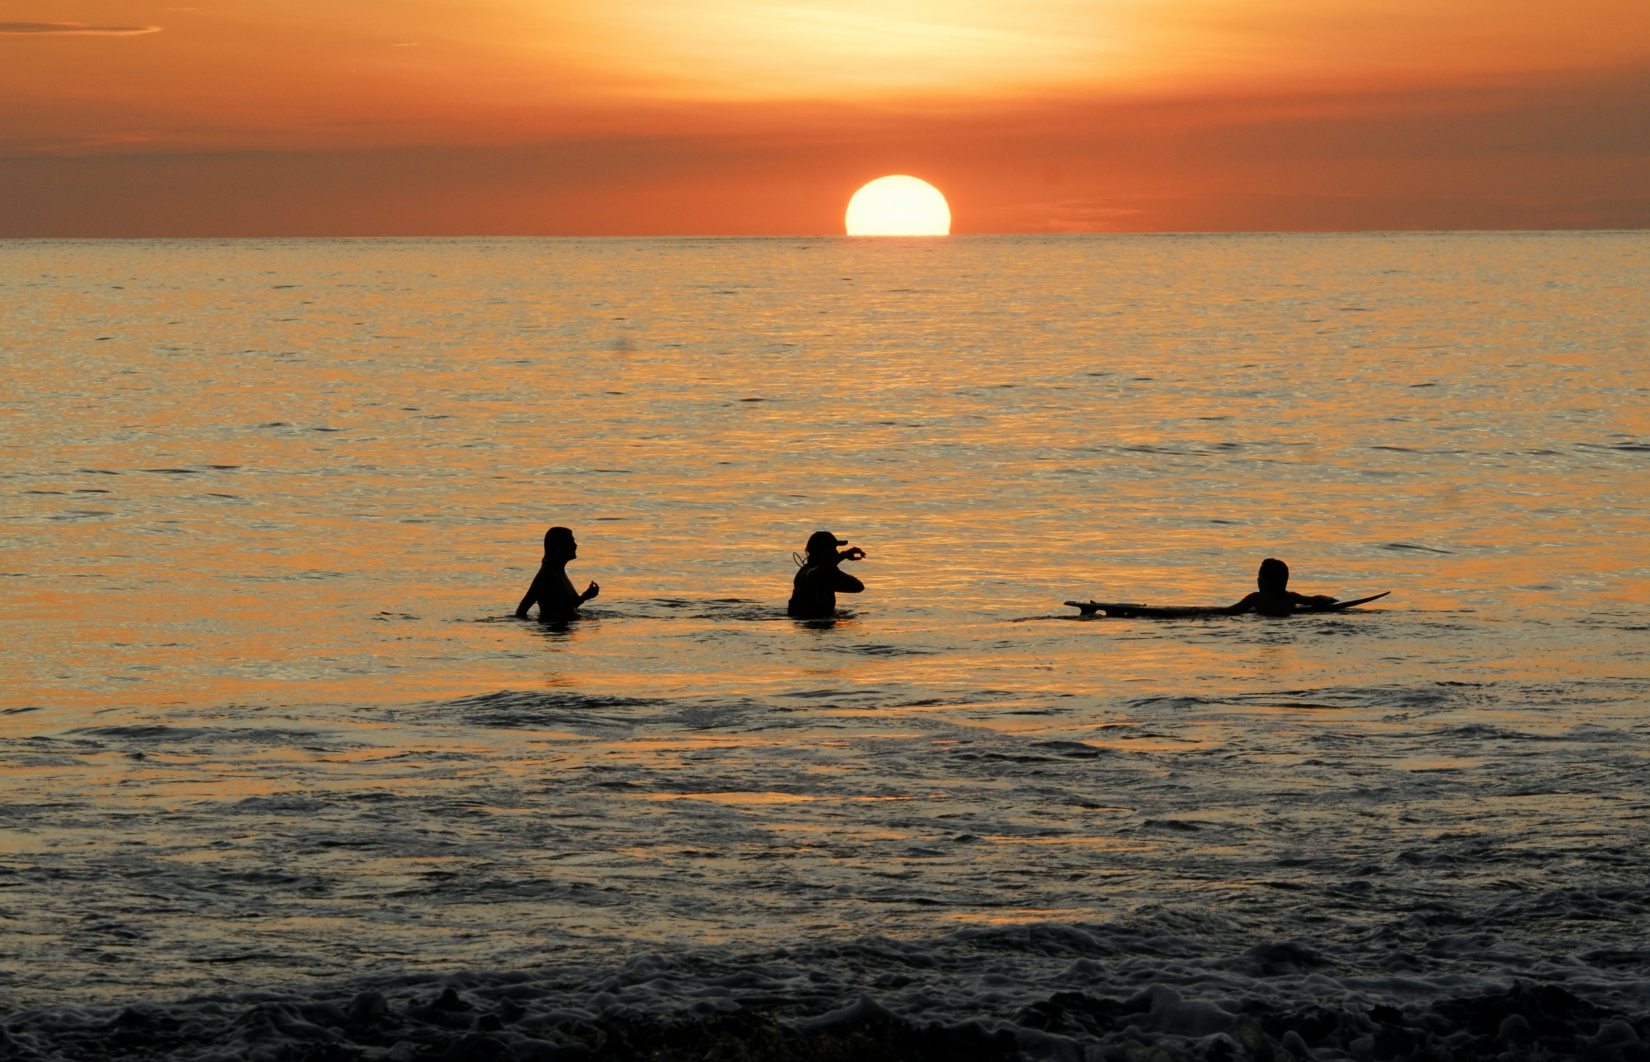 Three people swimming and surfing on the beach during a sunset 